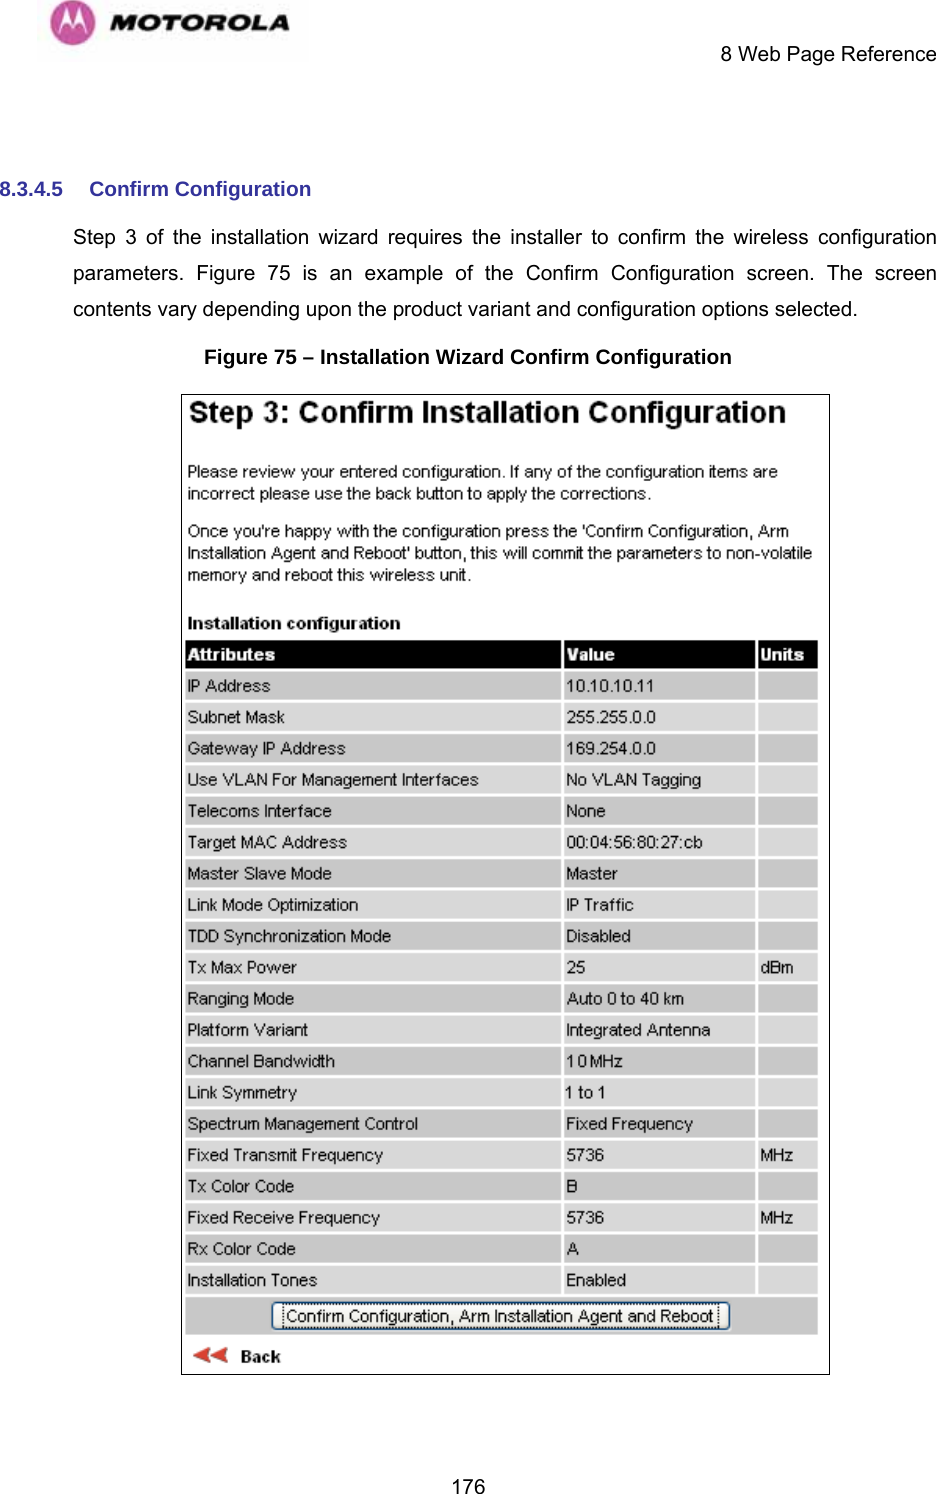     8 Web Page Reference  176 8.3.4.5 Confirm Configuration Step 3 of the installation wizard requires the installer to confirm the wireless configuration parameters.  Figure 75 is an example of the Confirm Configuration screen. The screen contents vary depending upon the product variant and configuration options selected. Figure 75 – Installation Wizard Confirm Configuration  